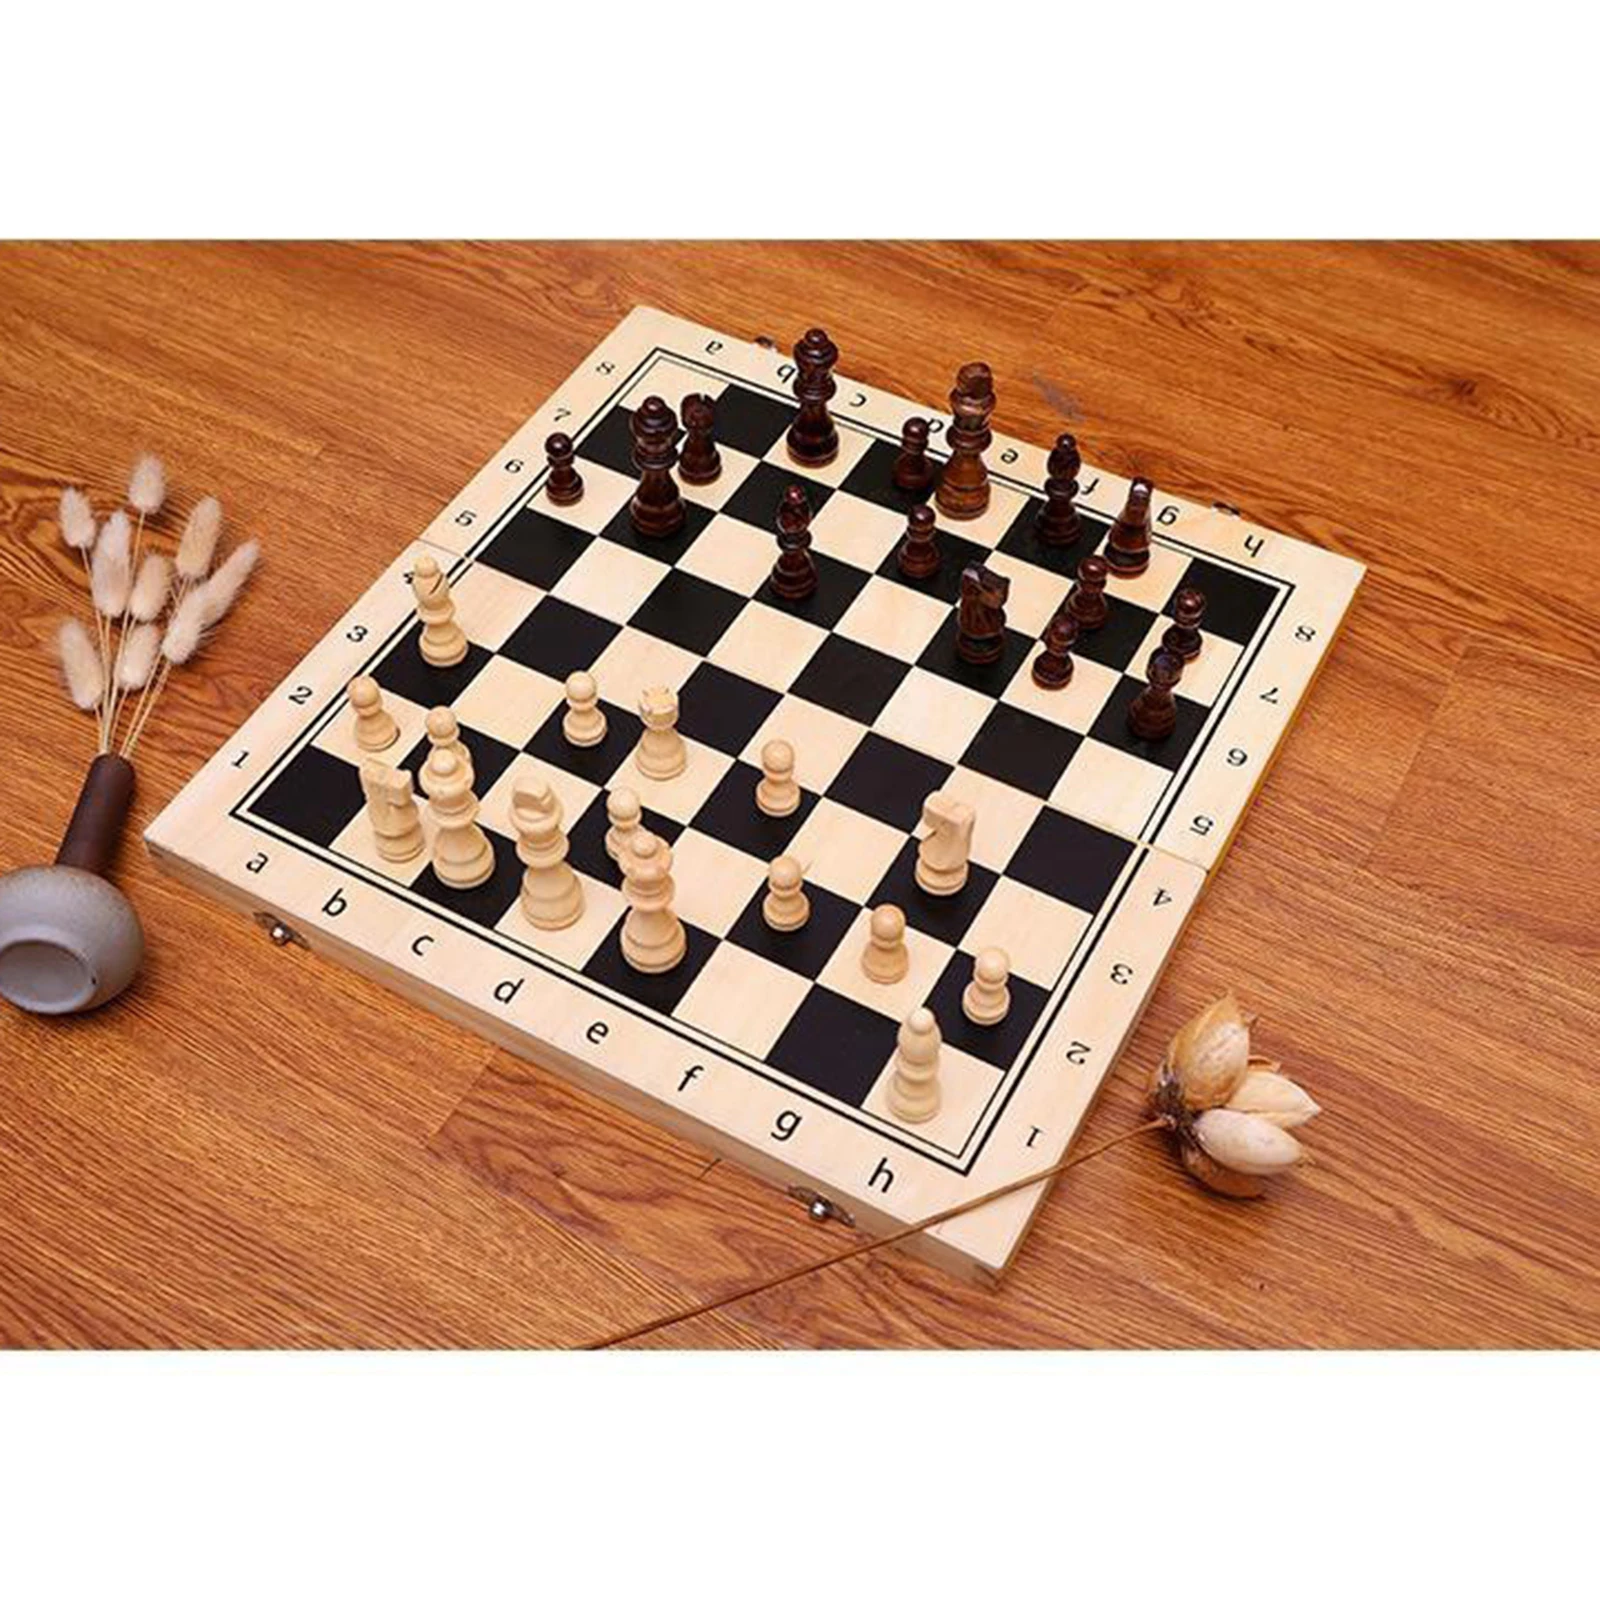 Foldable Magnetic Chess Board Set 29x29cm Interior Storage Family Game